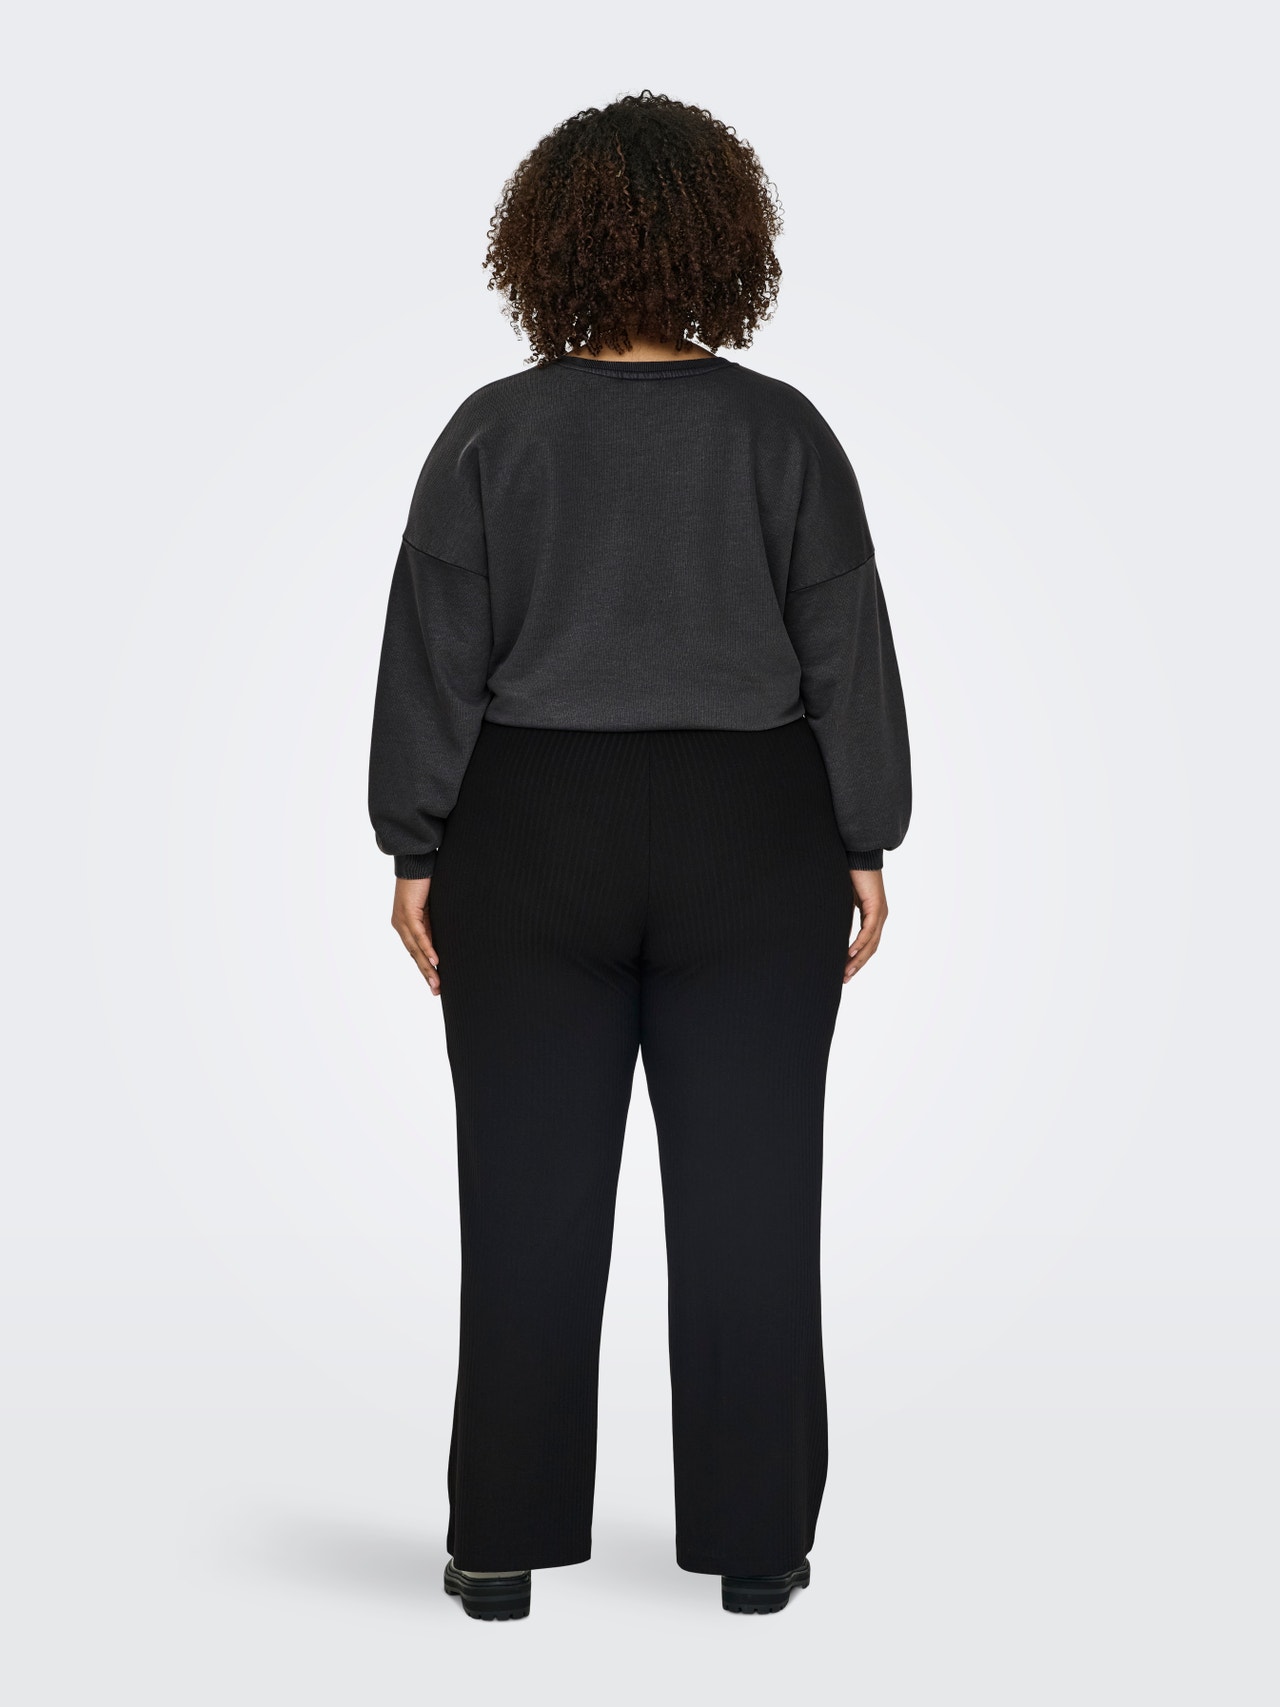 ONLY Curvy wide leg trousers -Black - 15337327